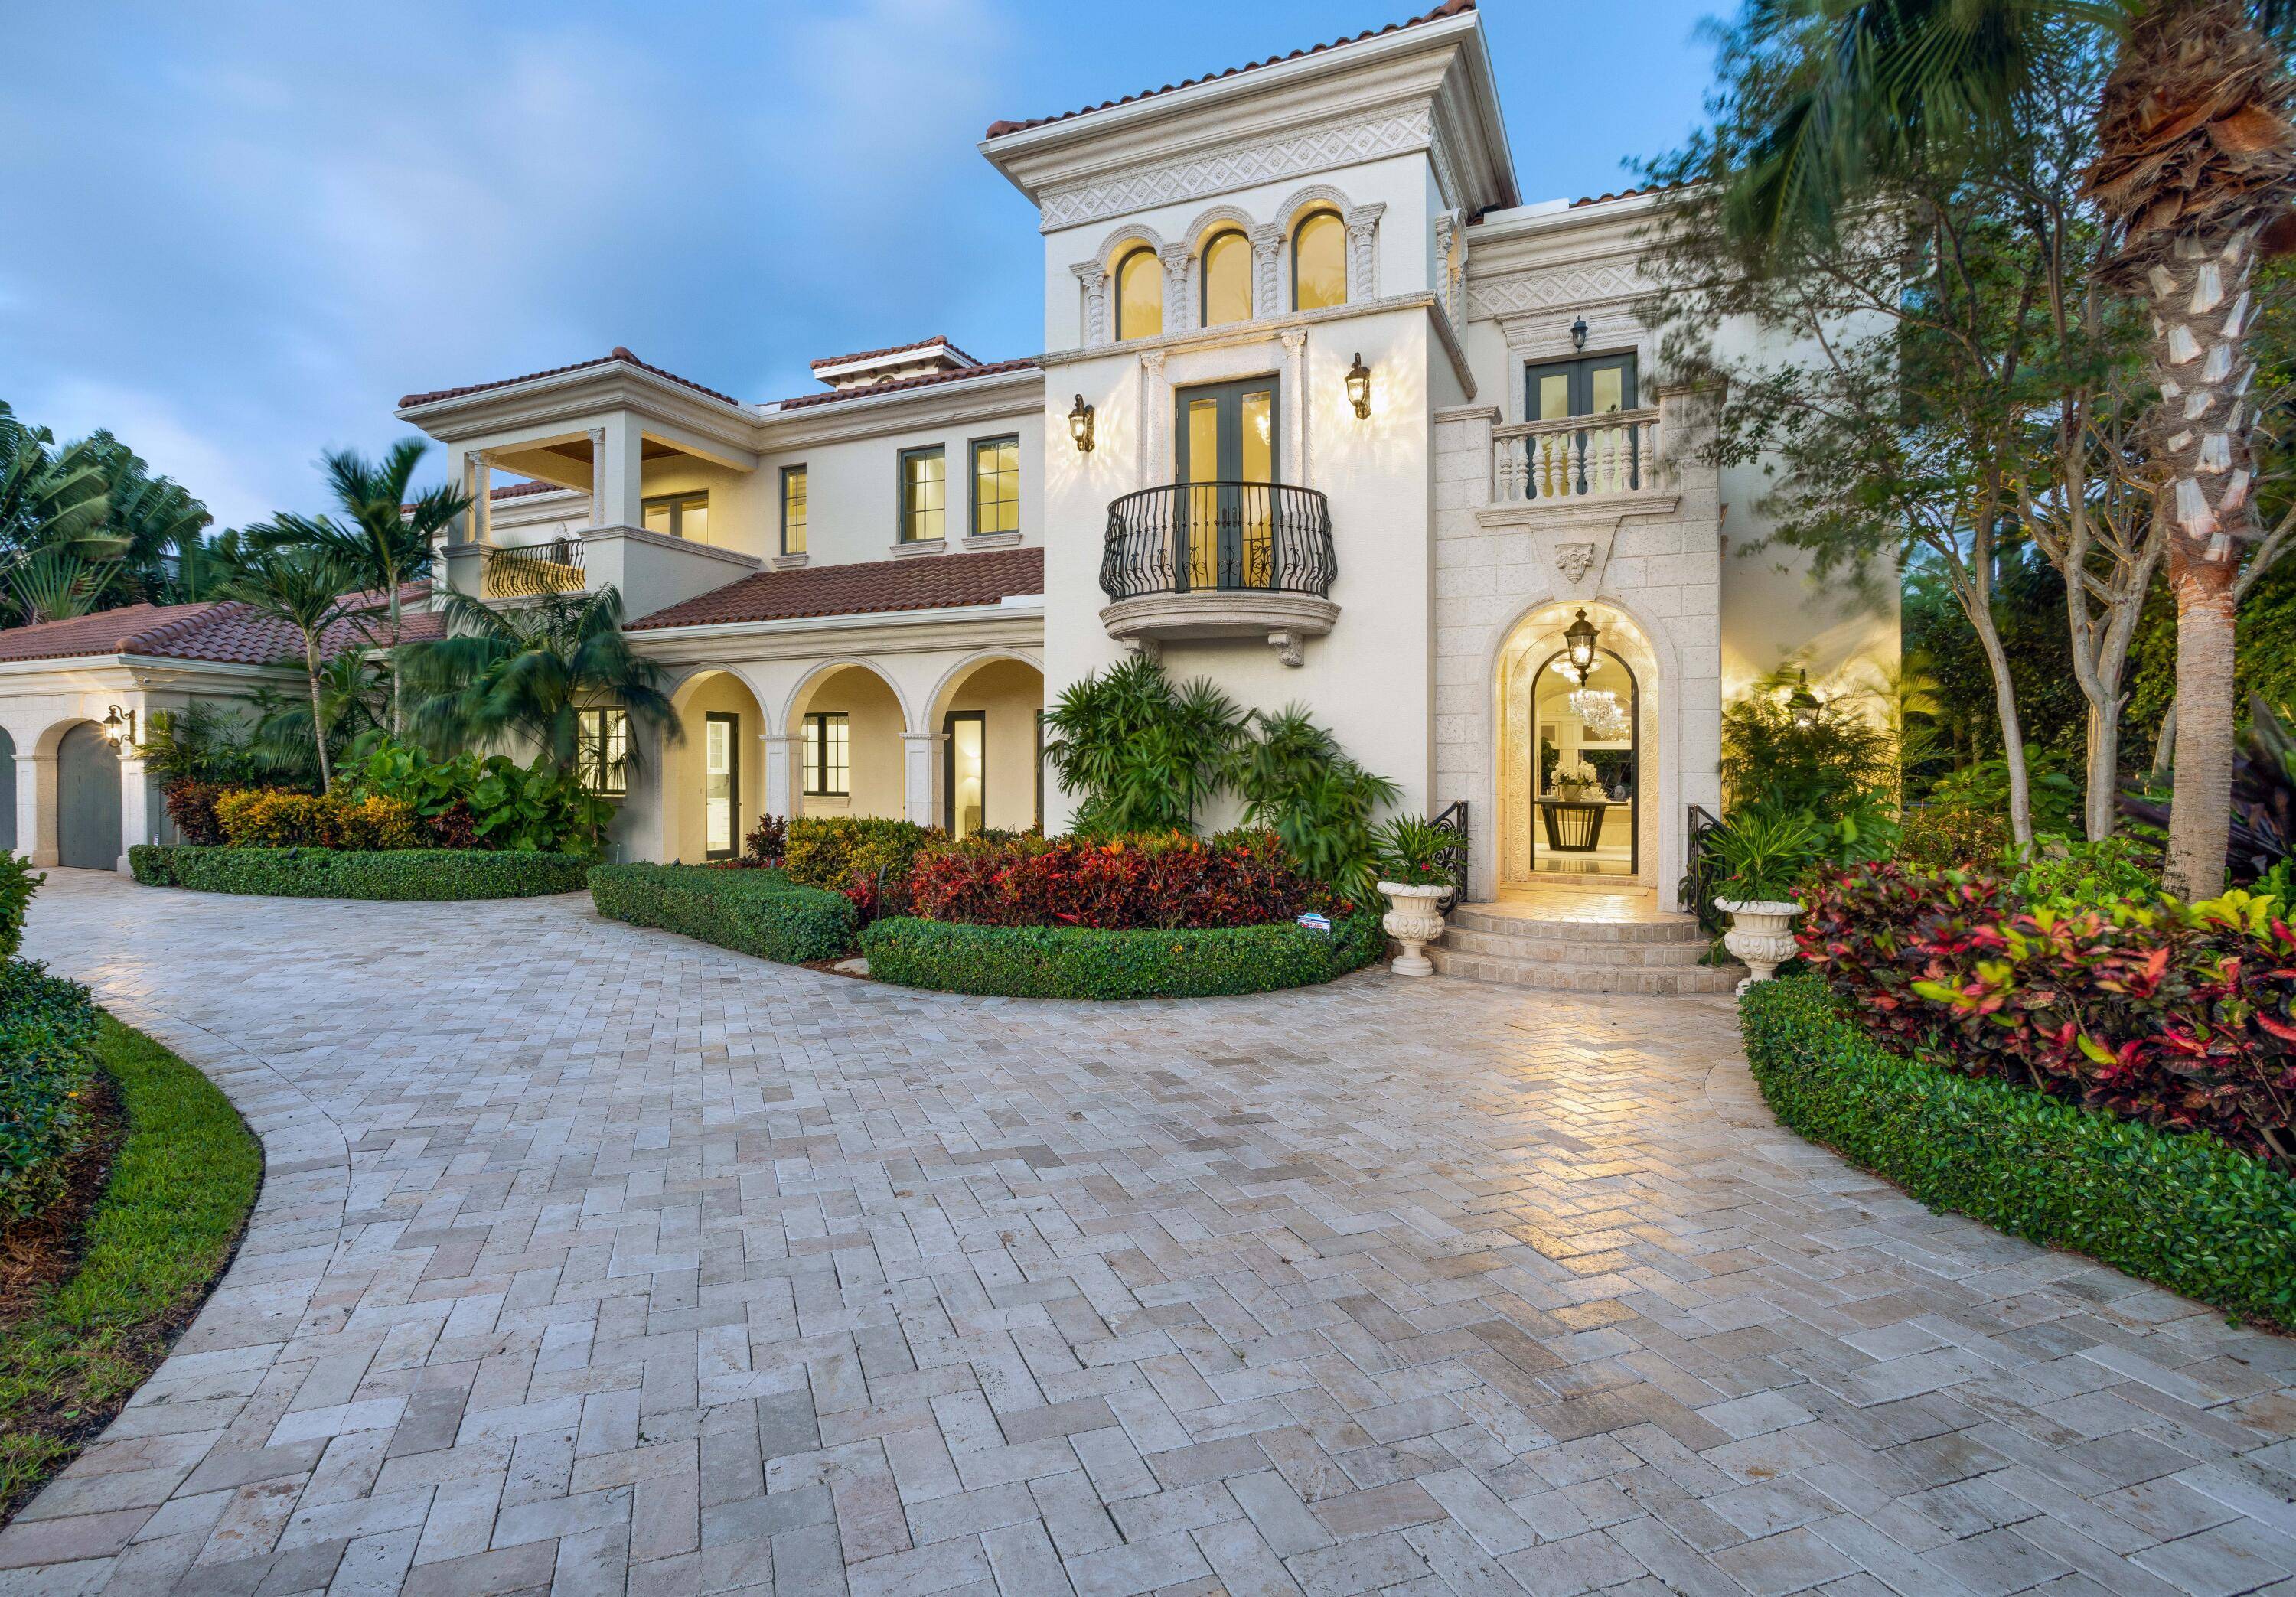 On this marvelously landscaped half acre property with stately formal gardens, a dock and 135 feet on the Intracoastal Waterway, residents enjoy spectacular sunset views from the loggias and balconies ...